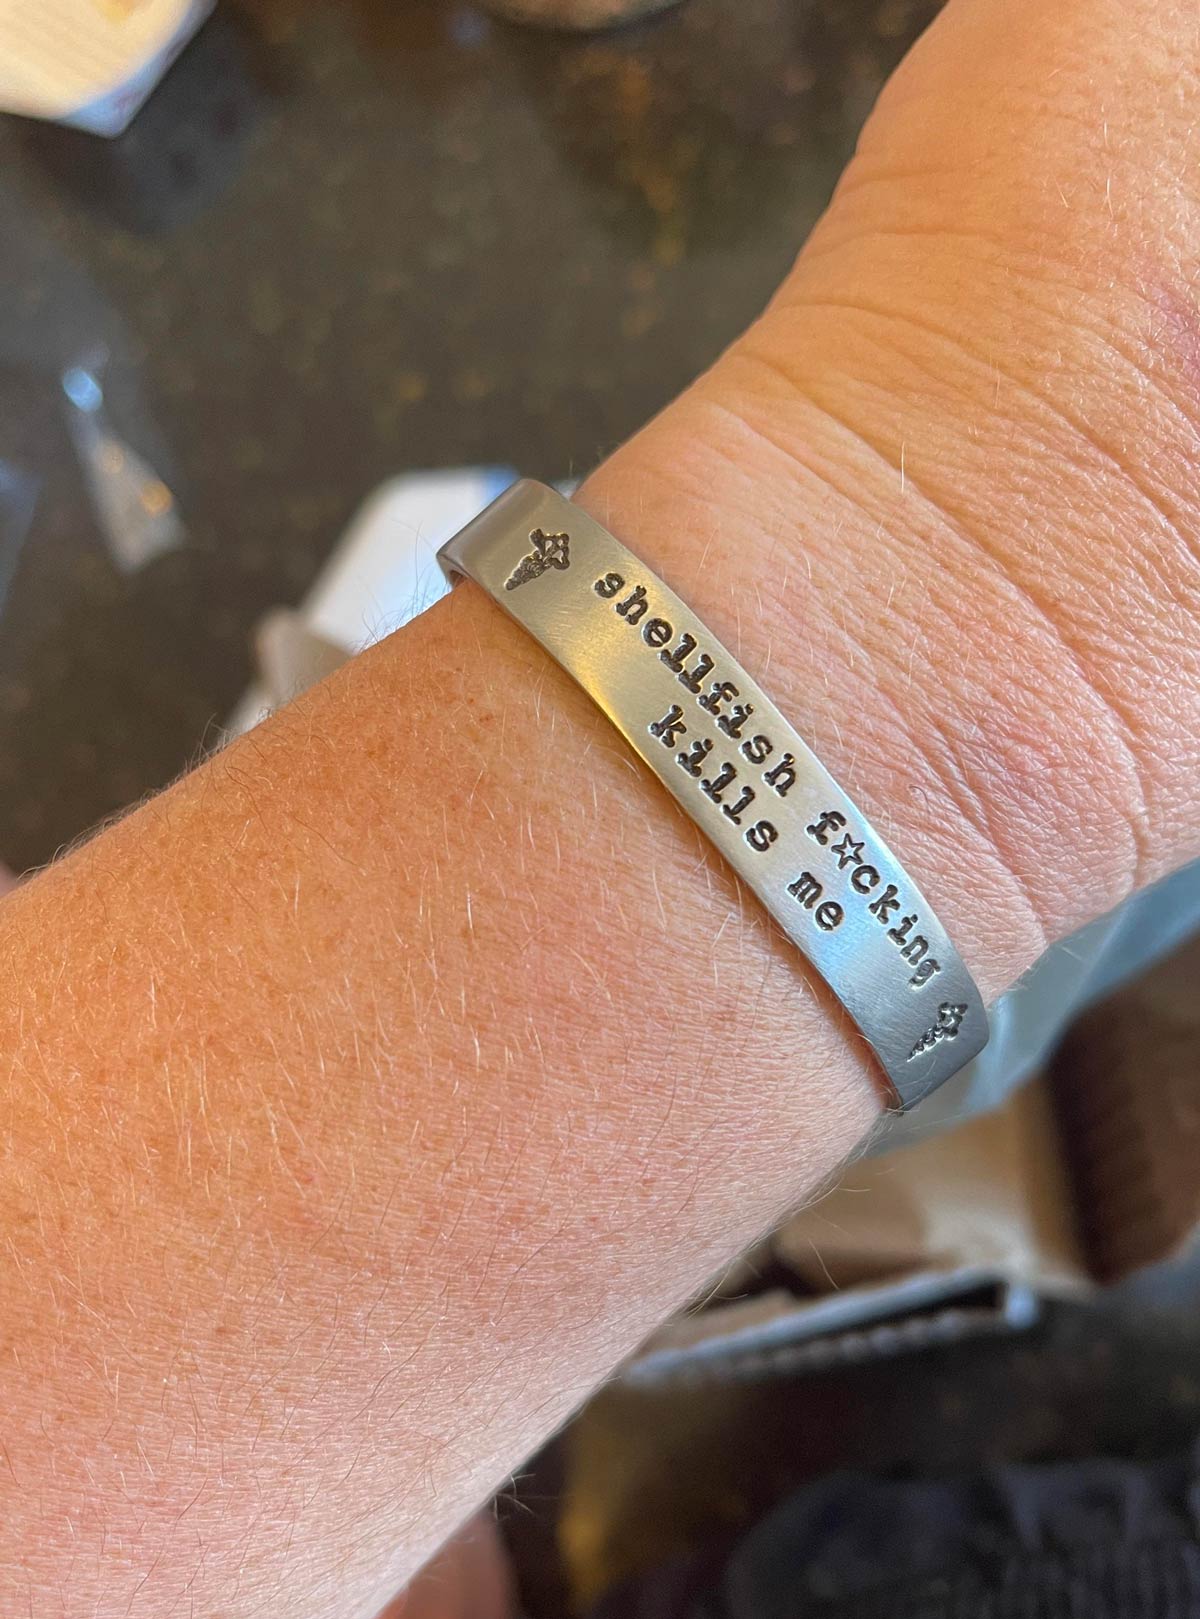 I developed an anaphylactic shellfish allergy last month at age 41. I’m pretty pissed about it, but my medical alert bracelet makes me smile